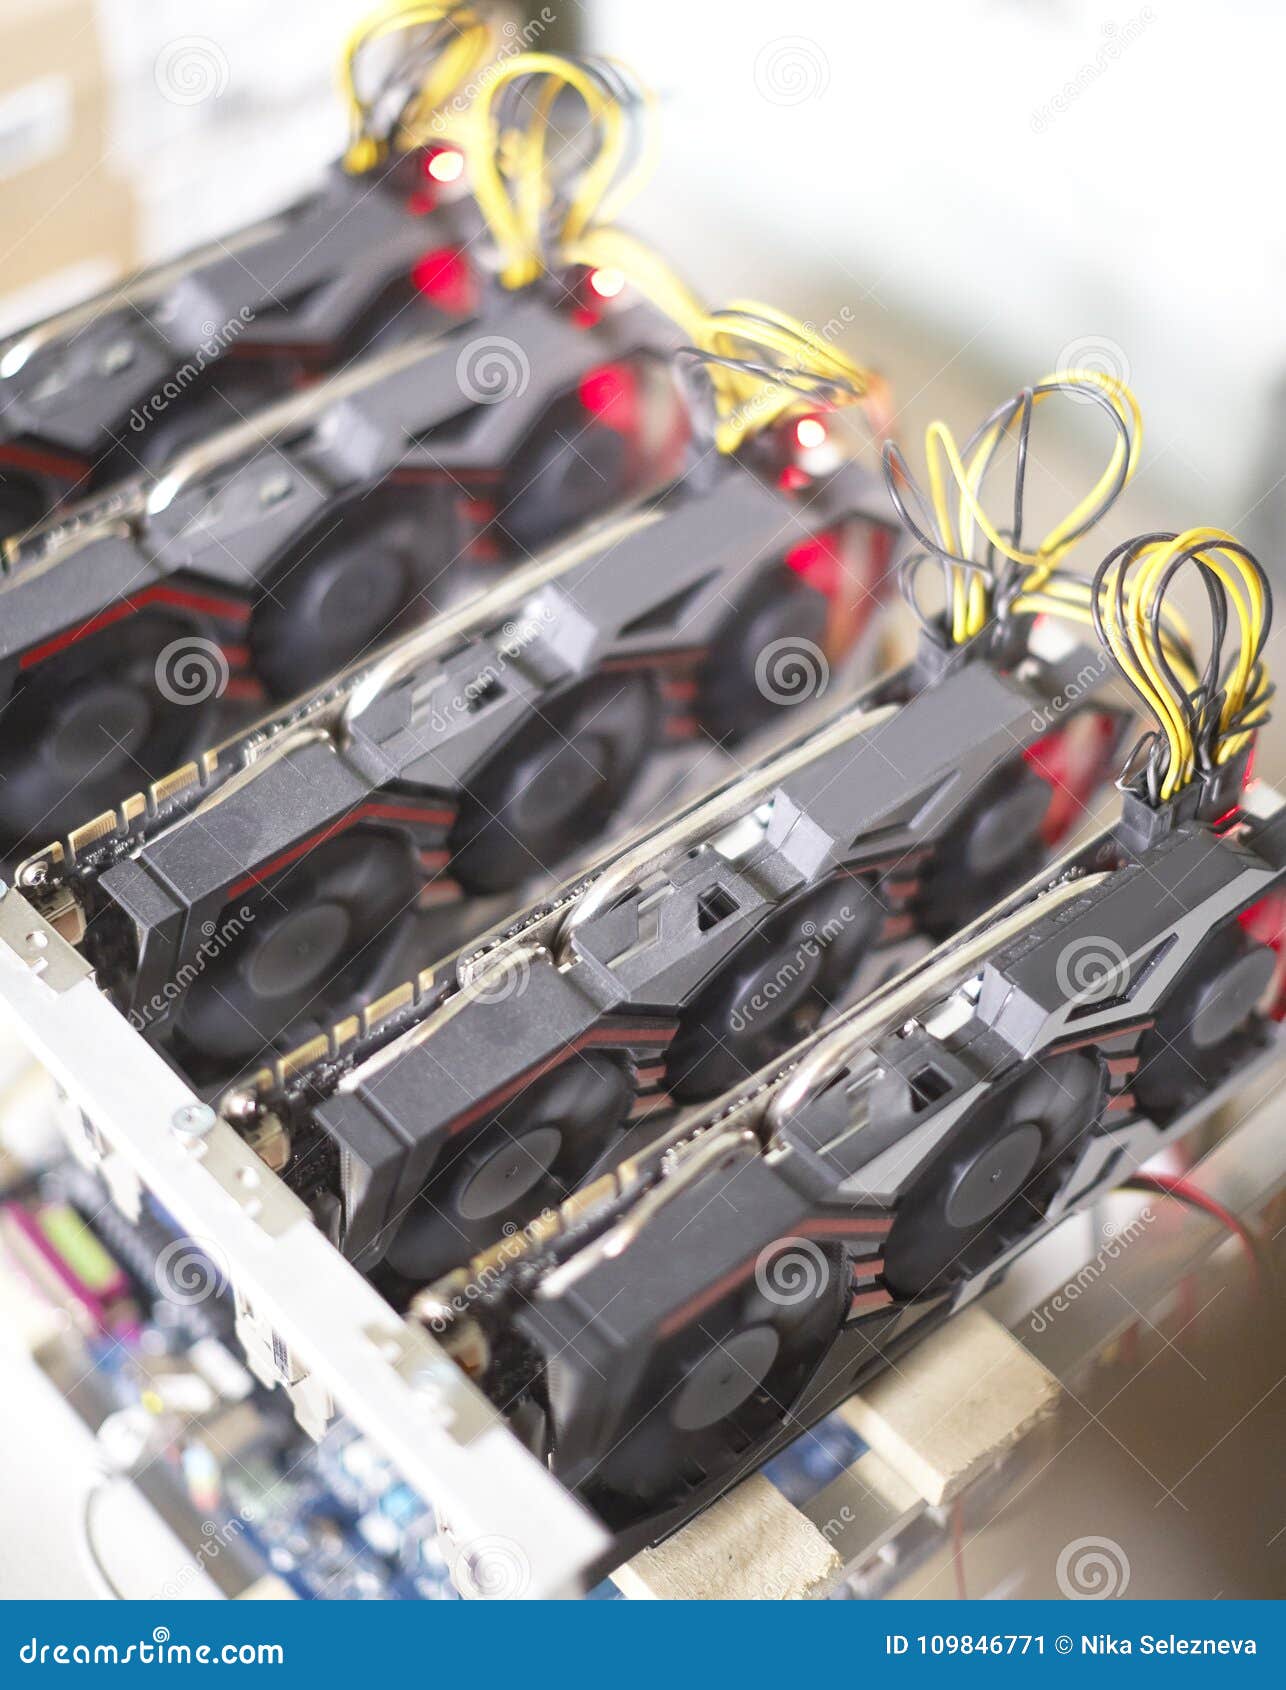 can i mine cryptocurrency with a graphics card